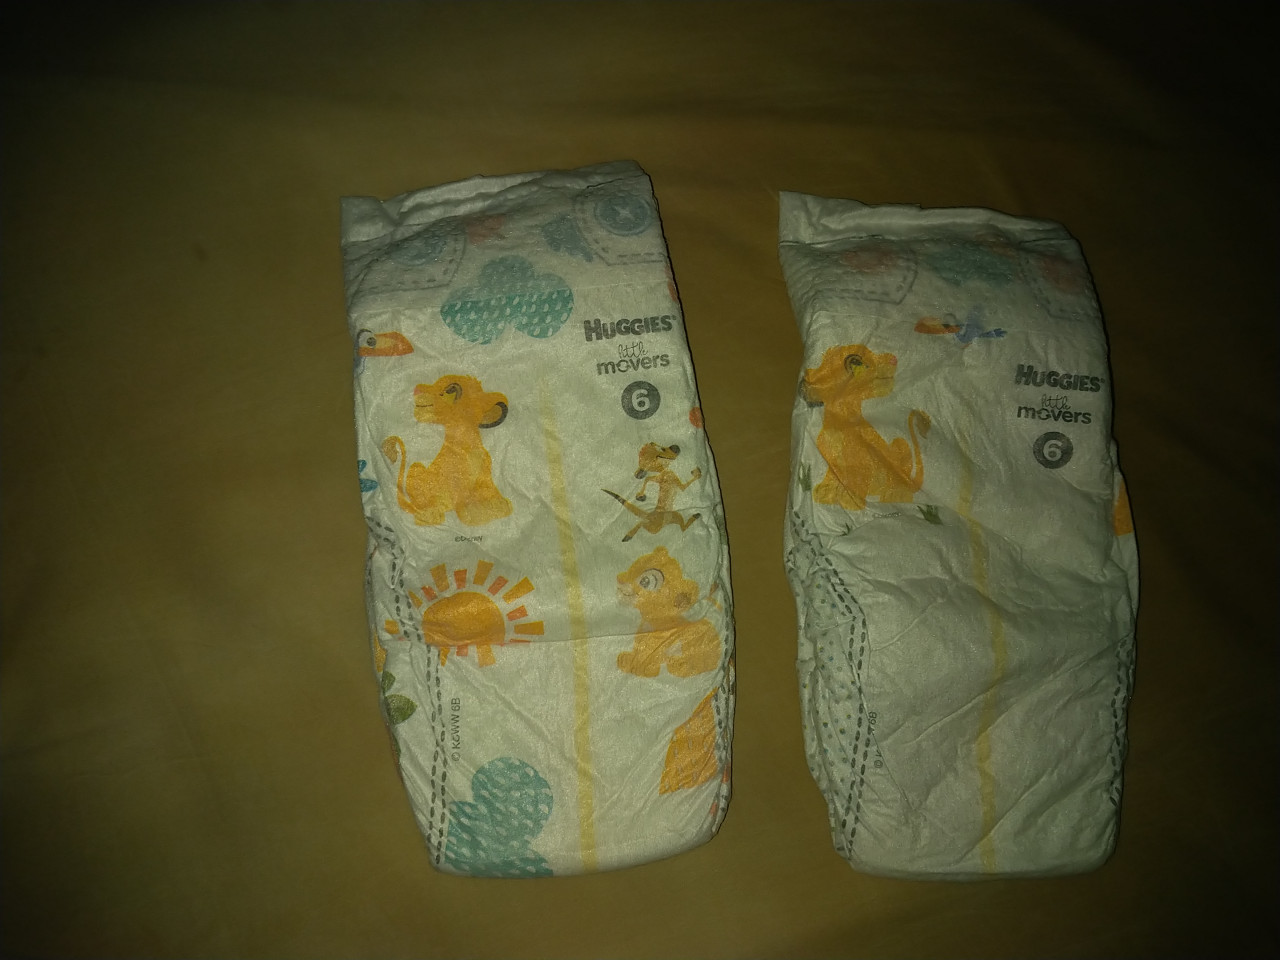 Lion king little movers diapers - Page 2